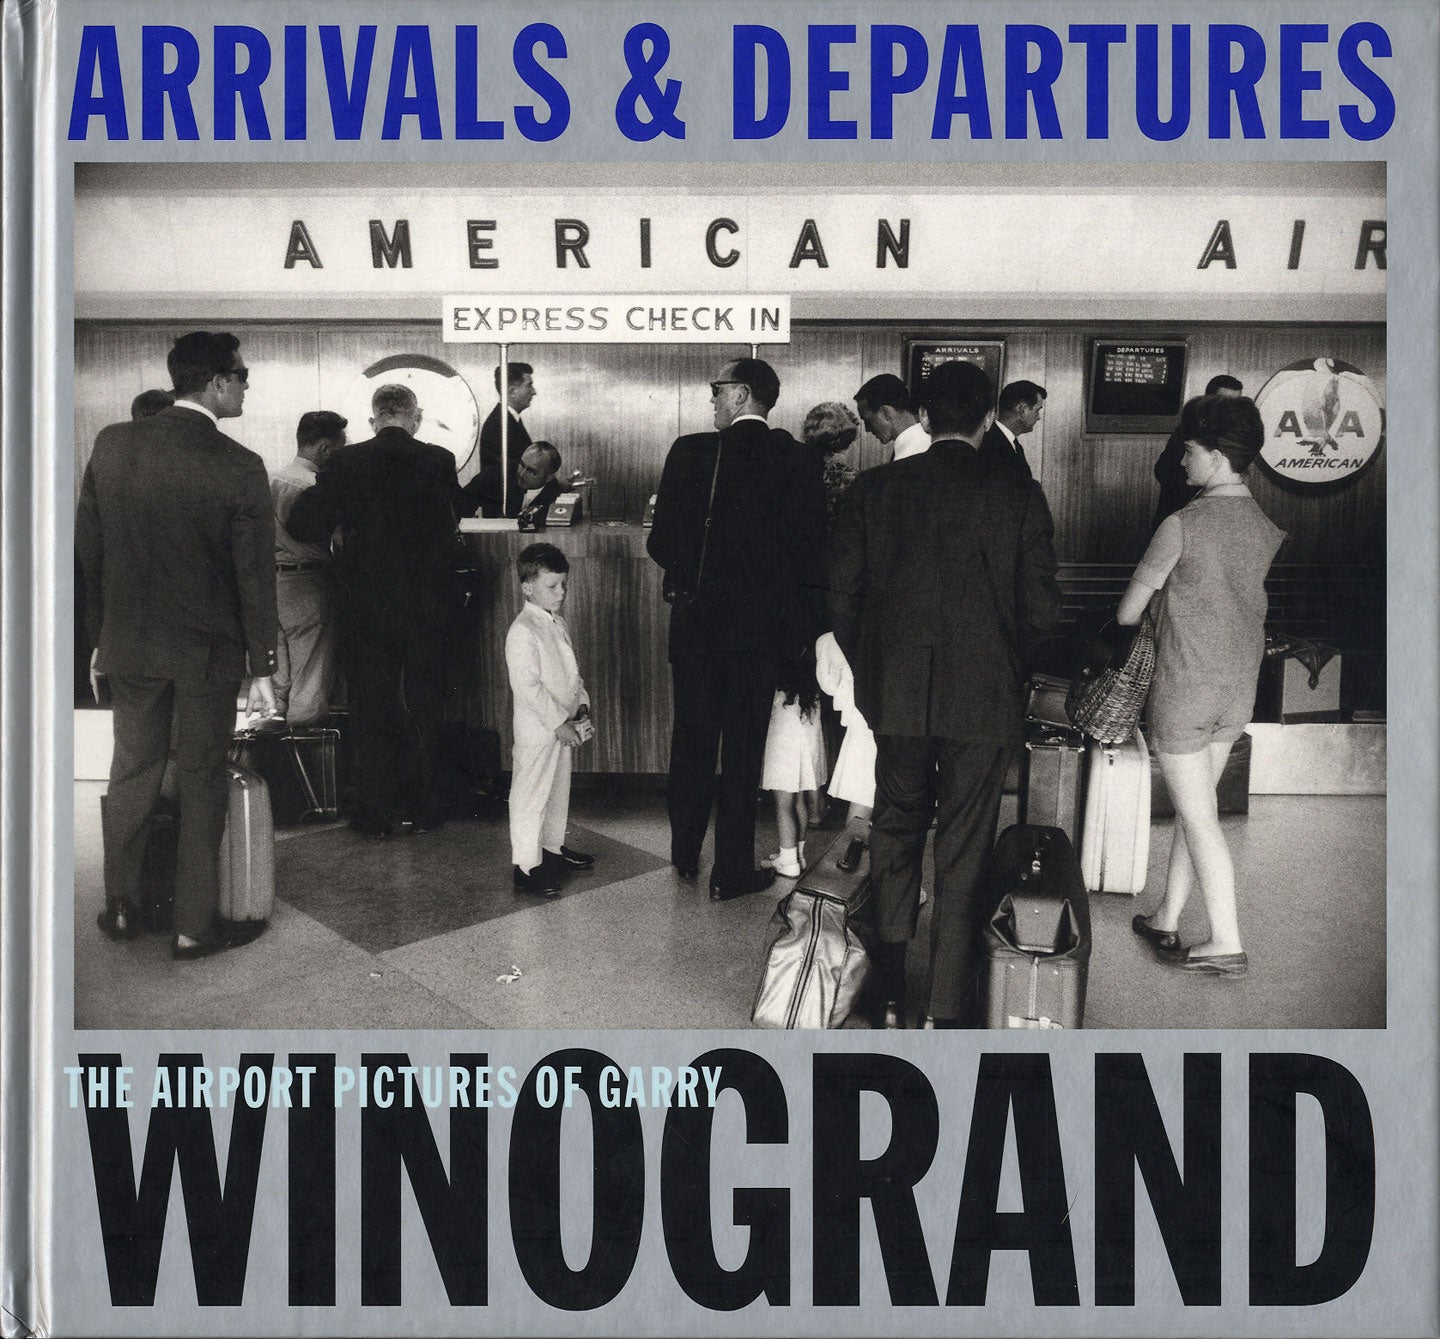 Arrivals & Departures: The Airport Pictures of Garry Winogrand